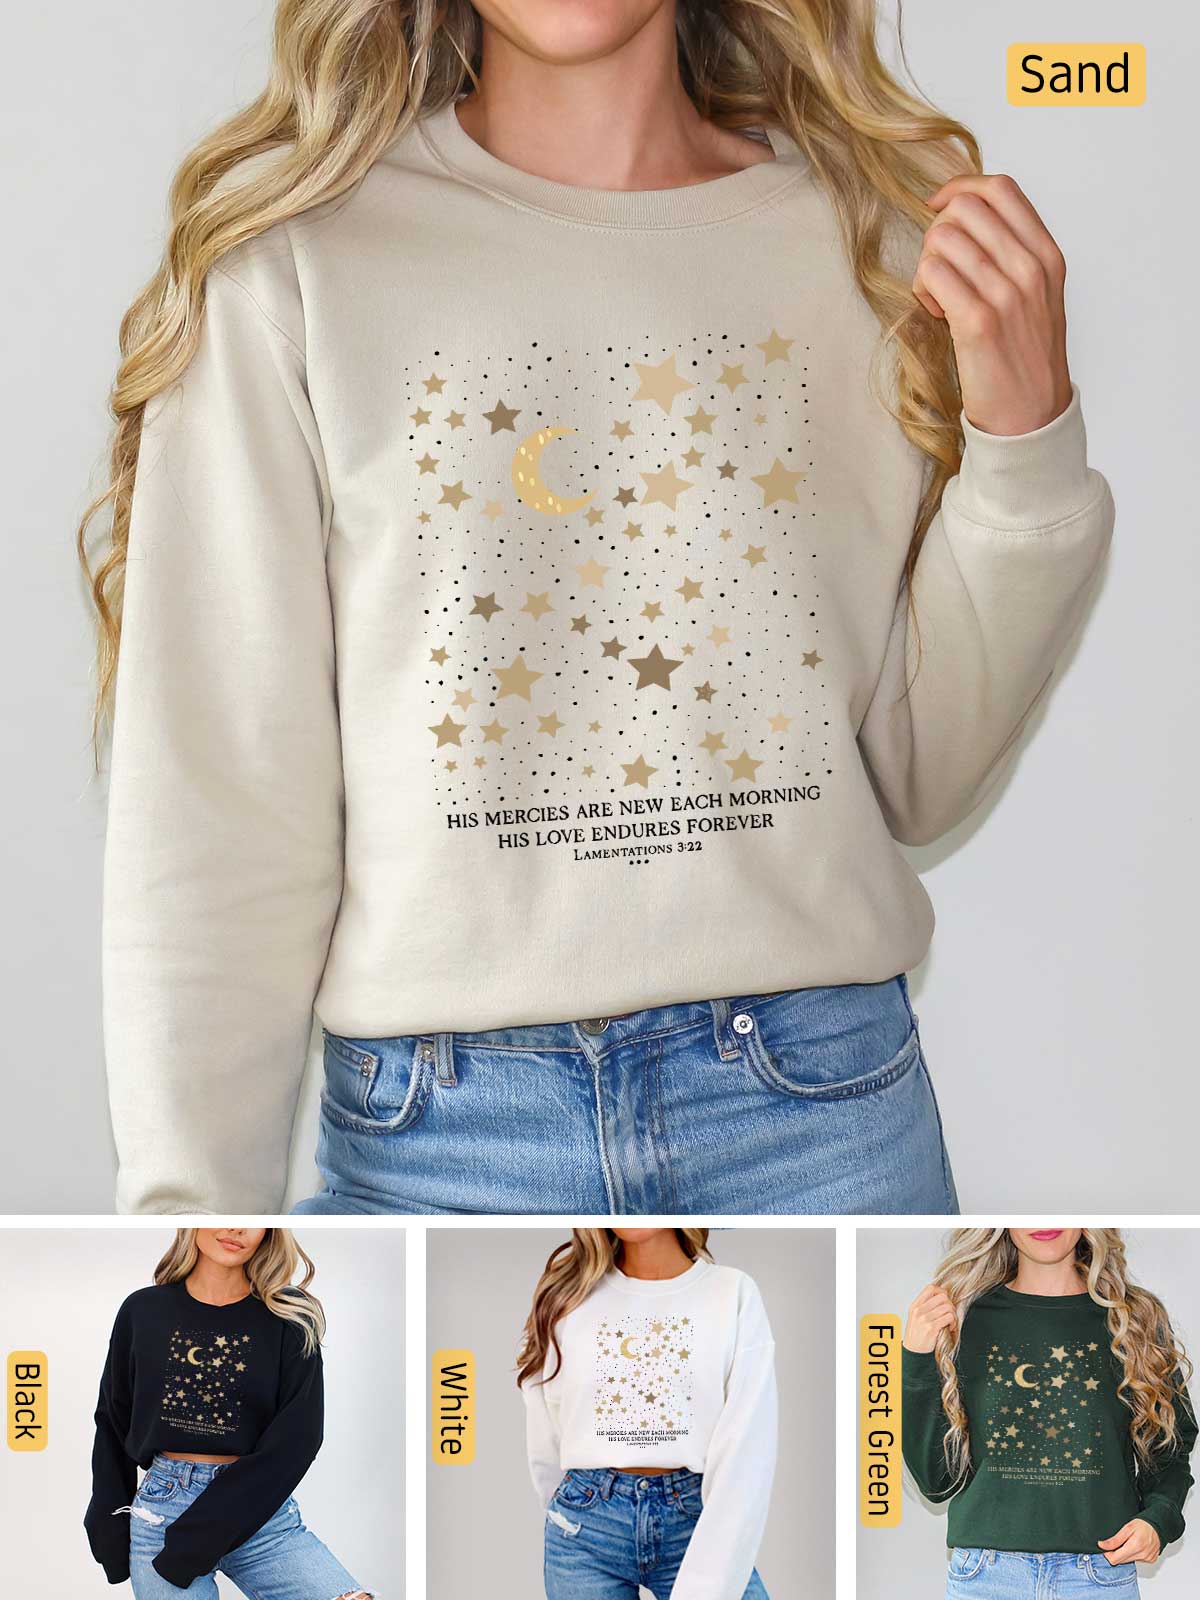 a woman wearing a sweater with stars and moon on it